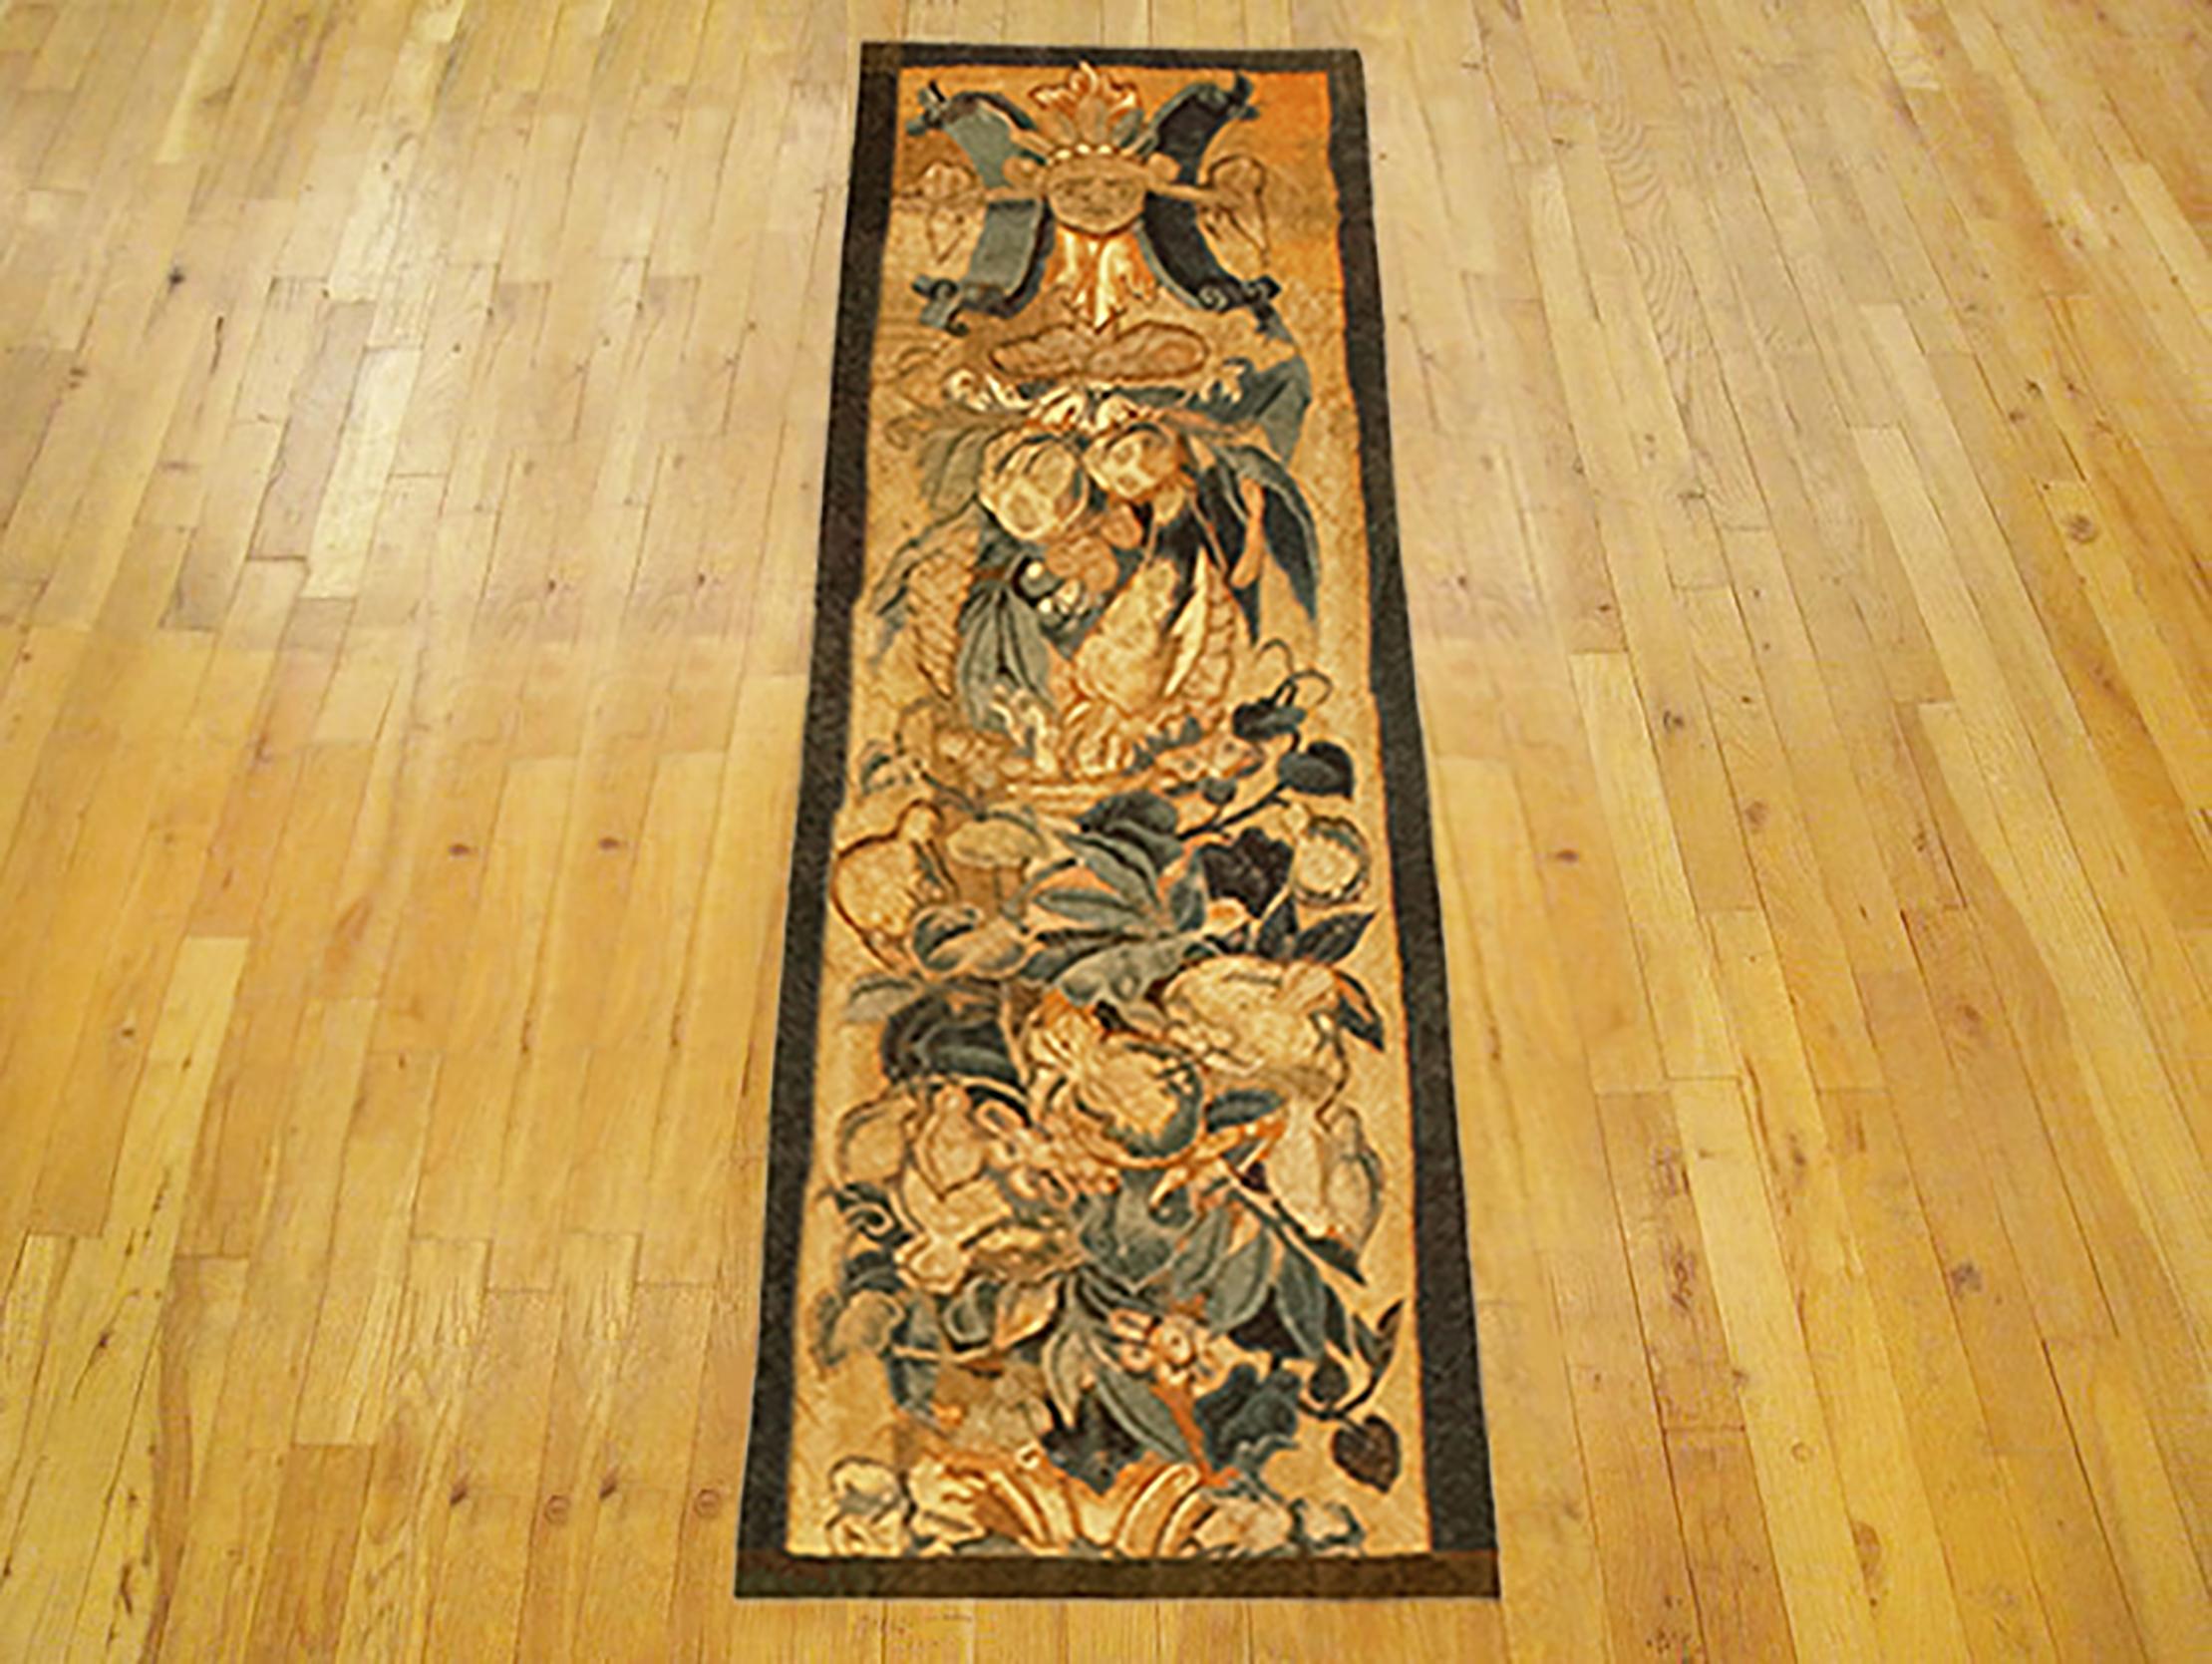 A 16th Century Brussels historical tapestry panel. This vertically oriented decorative tapestry panel depicts a scrolling foliate design, with a grotesque and a coat of arms at top, and with ribbon ties and acanthus leaves below. The central area is